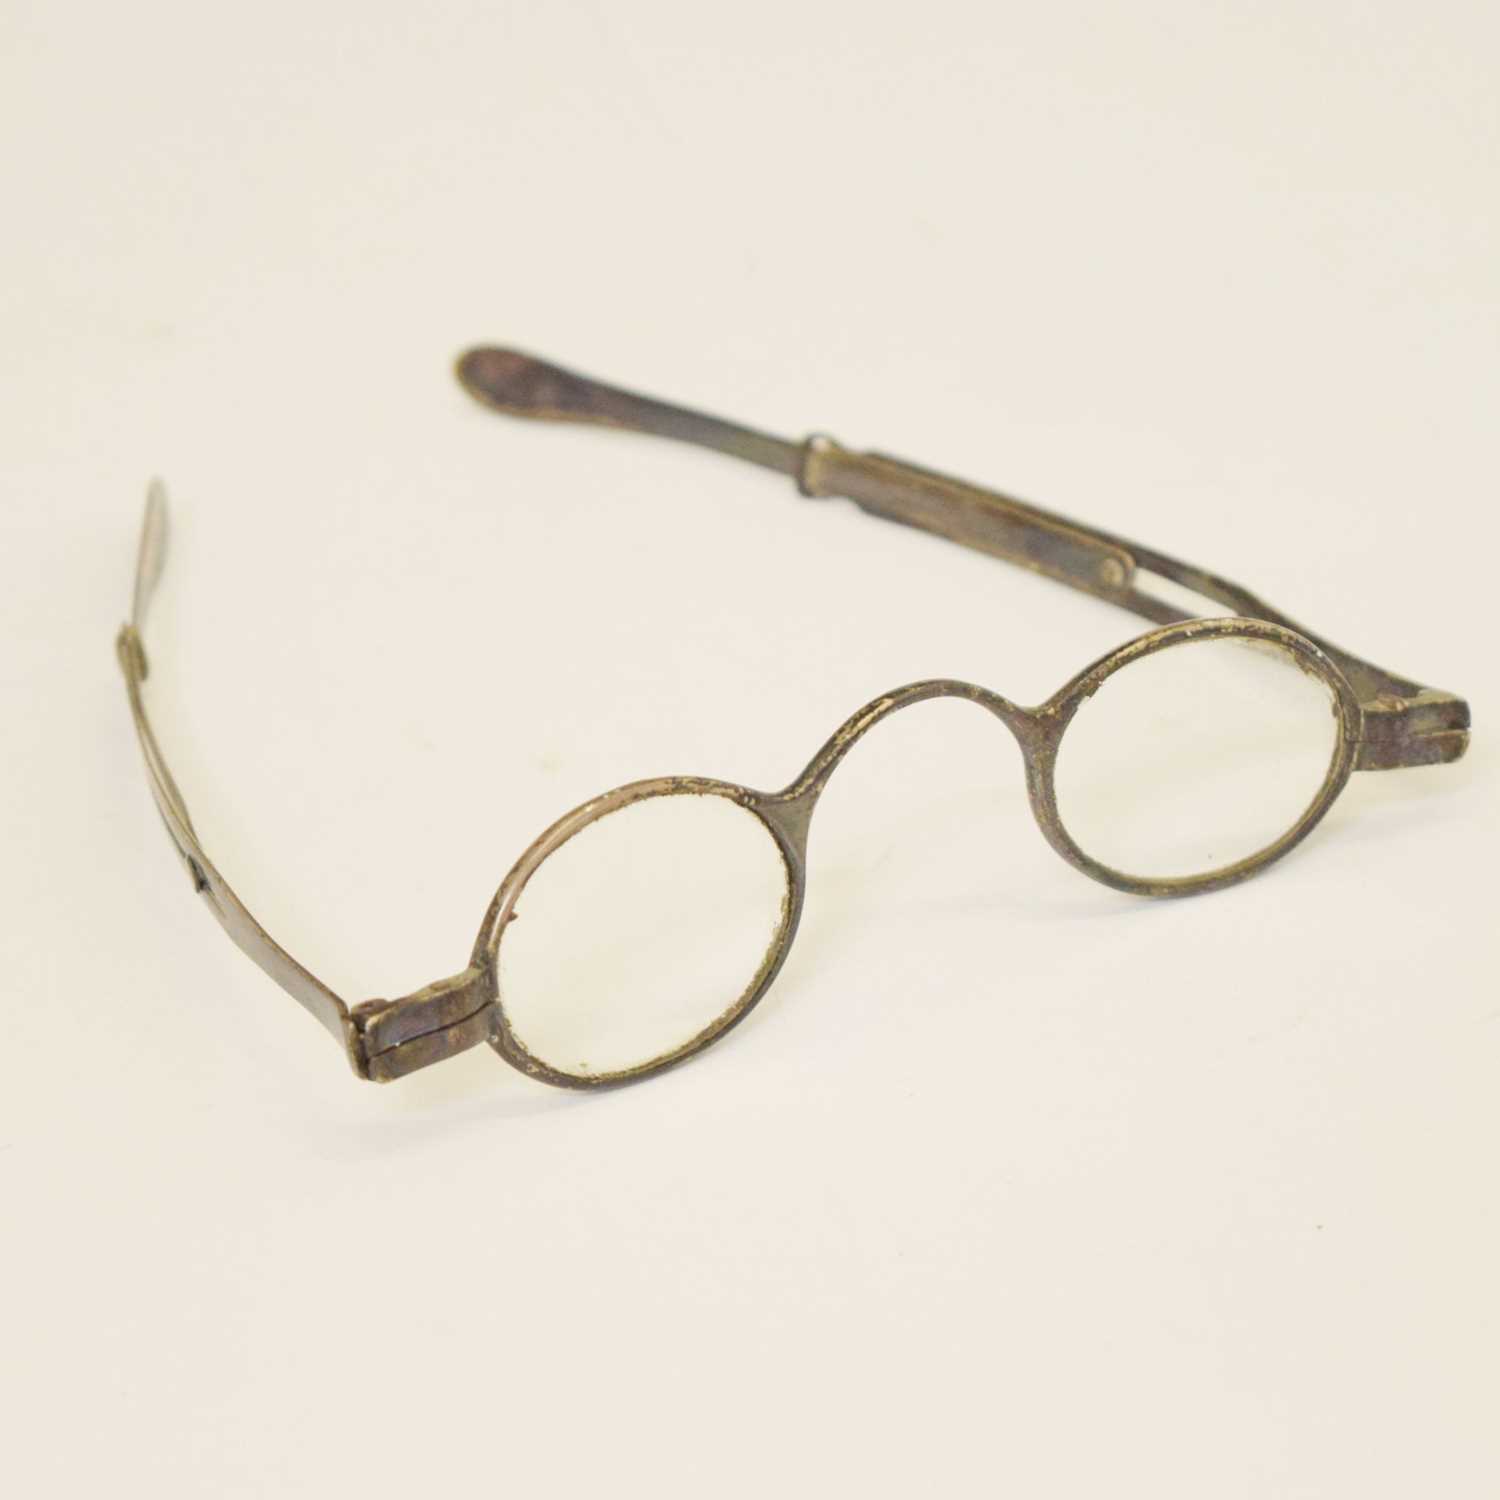 Pair of George III silver-mounted spectacles